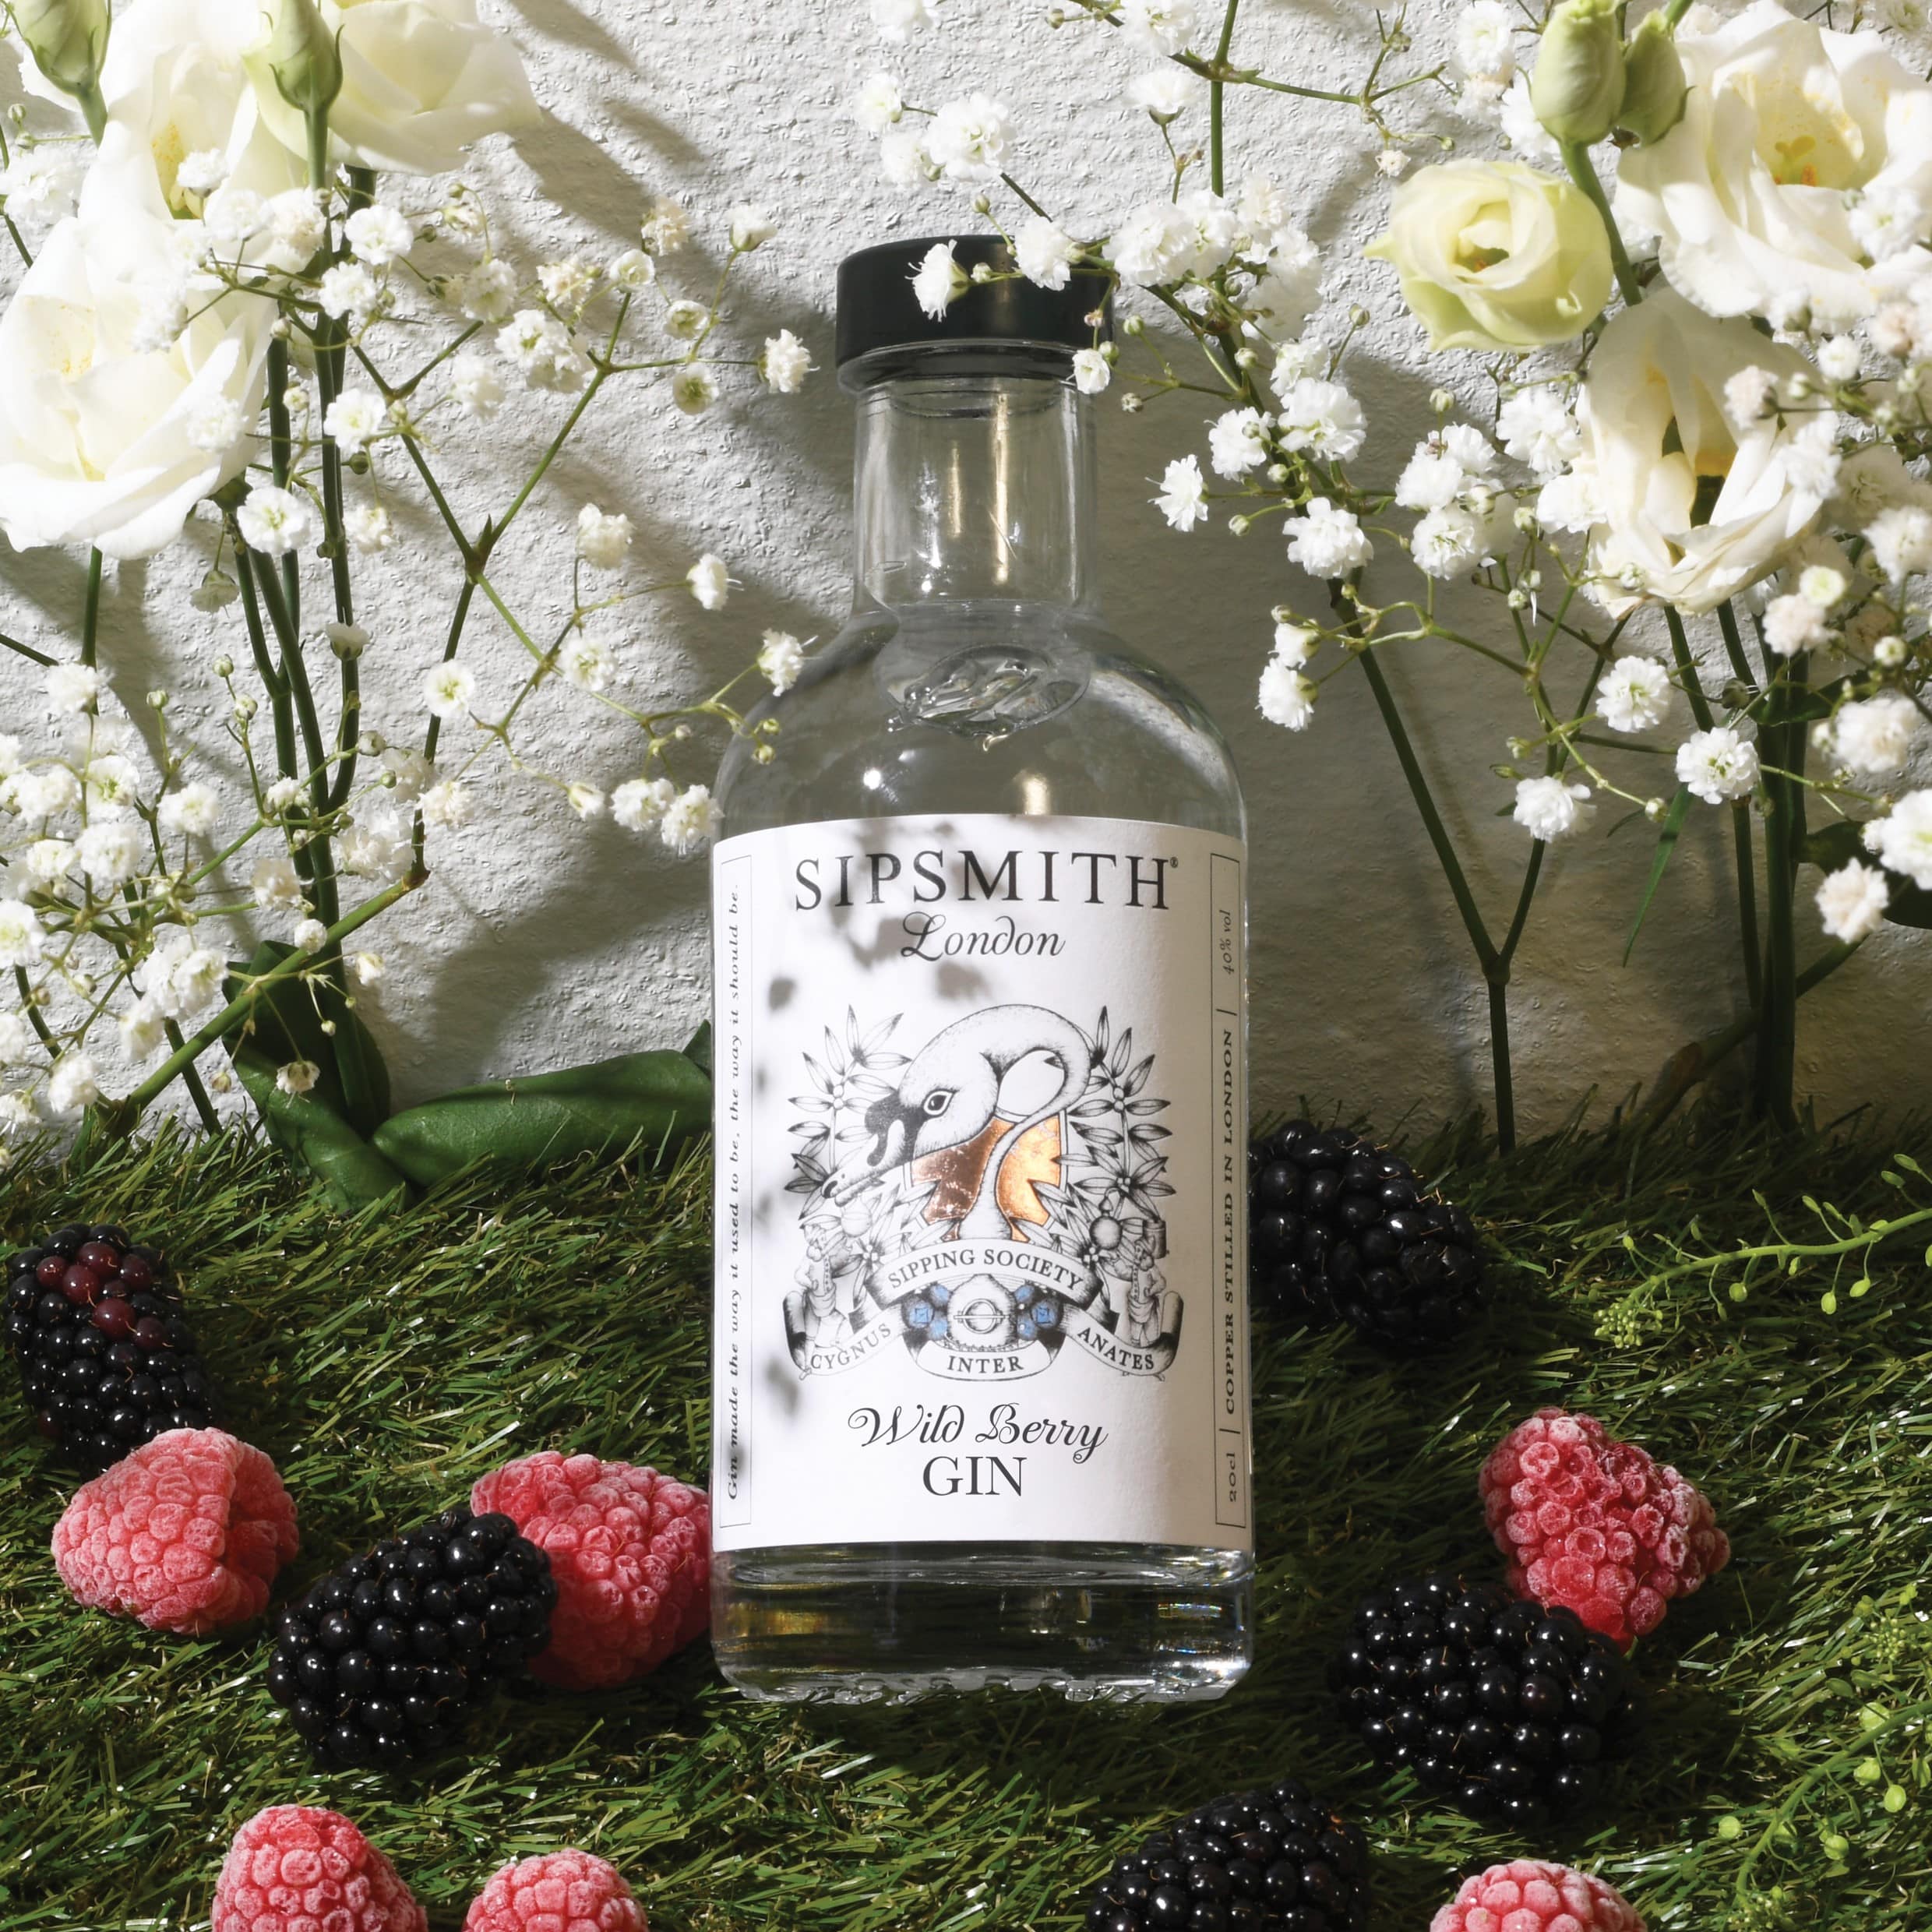 A photo of sipsmith Sipping society Wild Berry Gin